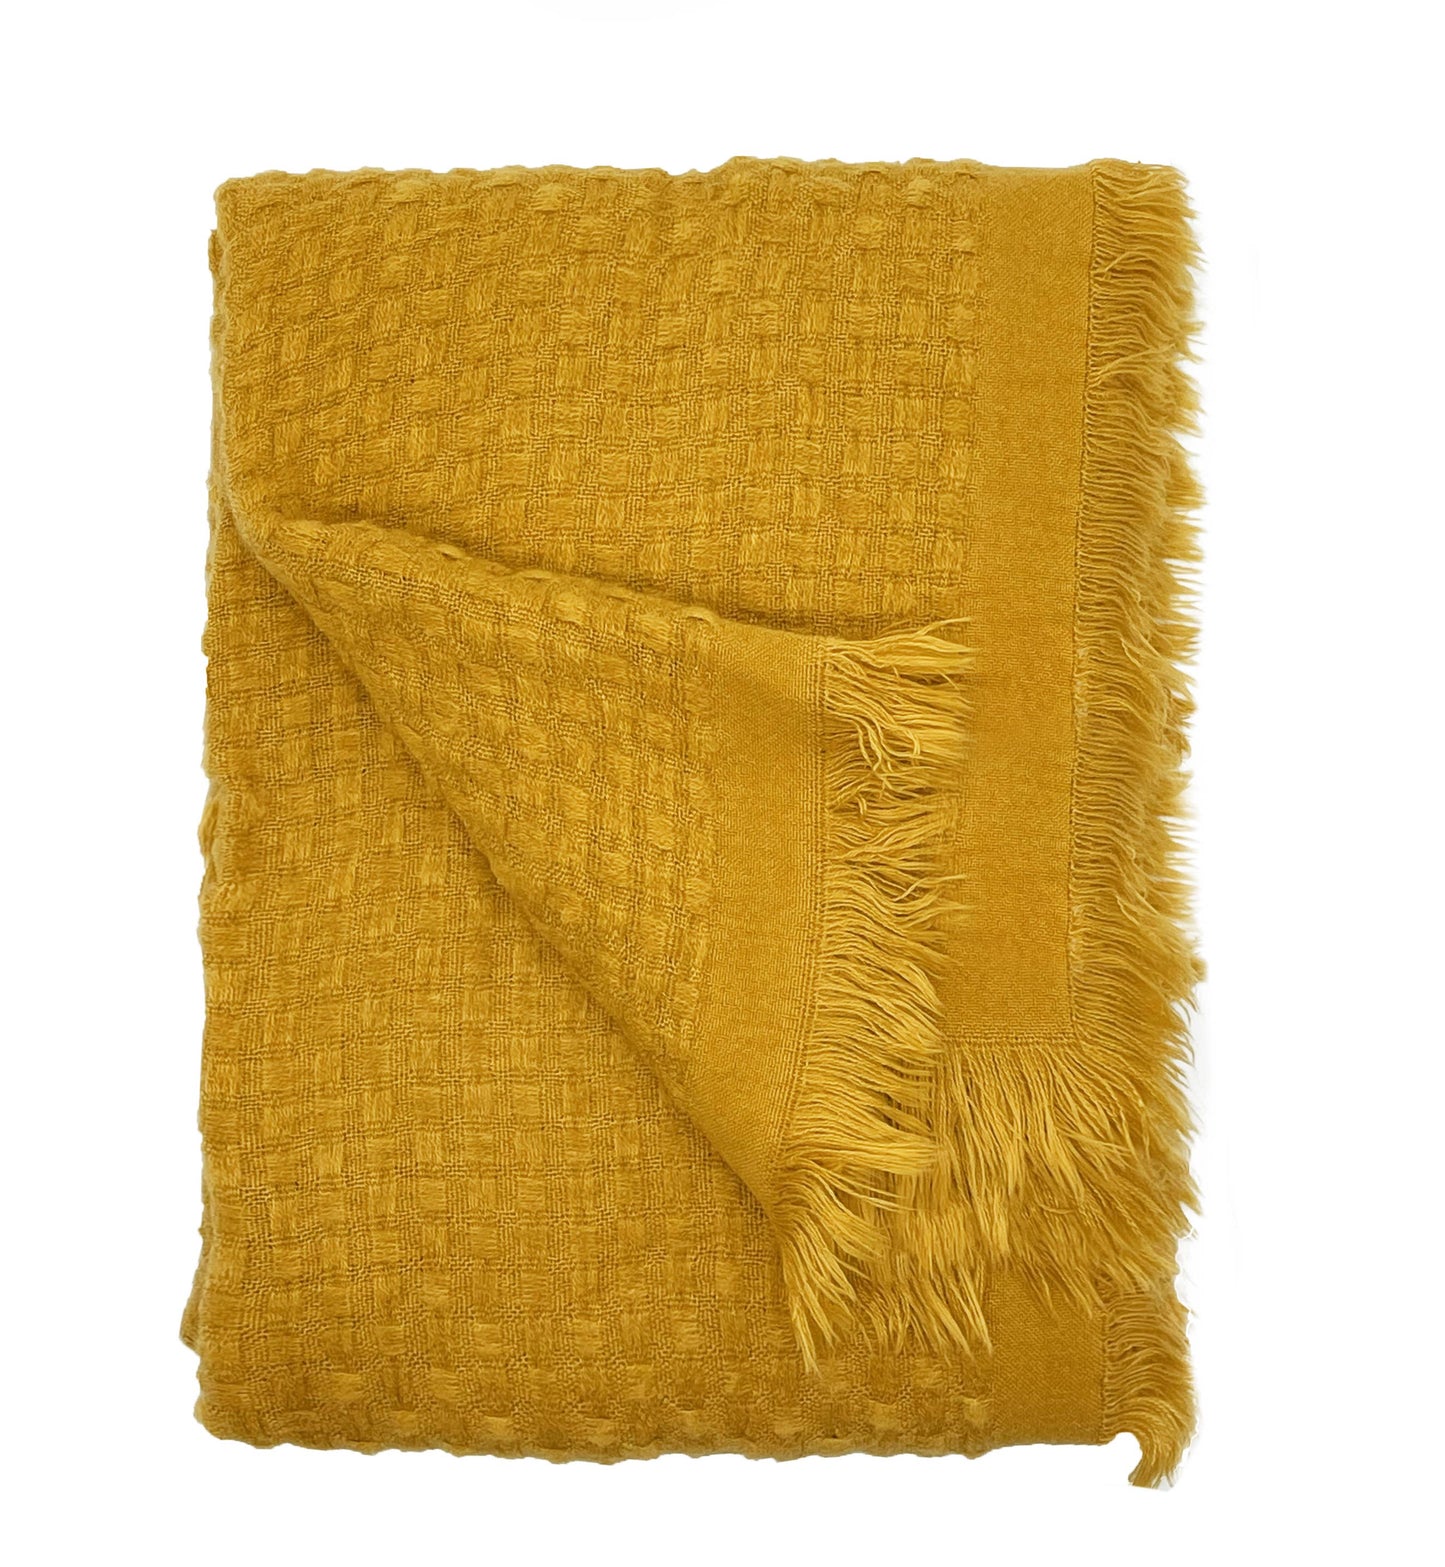 Waffle Weave Solid 50"X60" Throw Blanket with Fringe